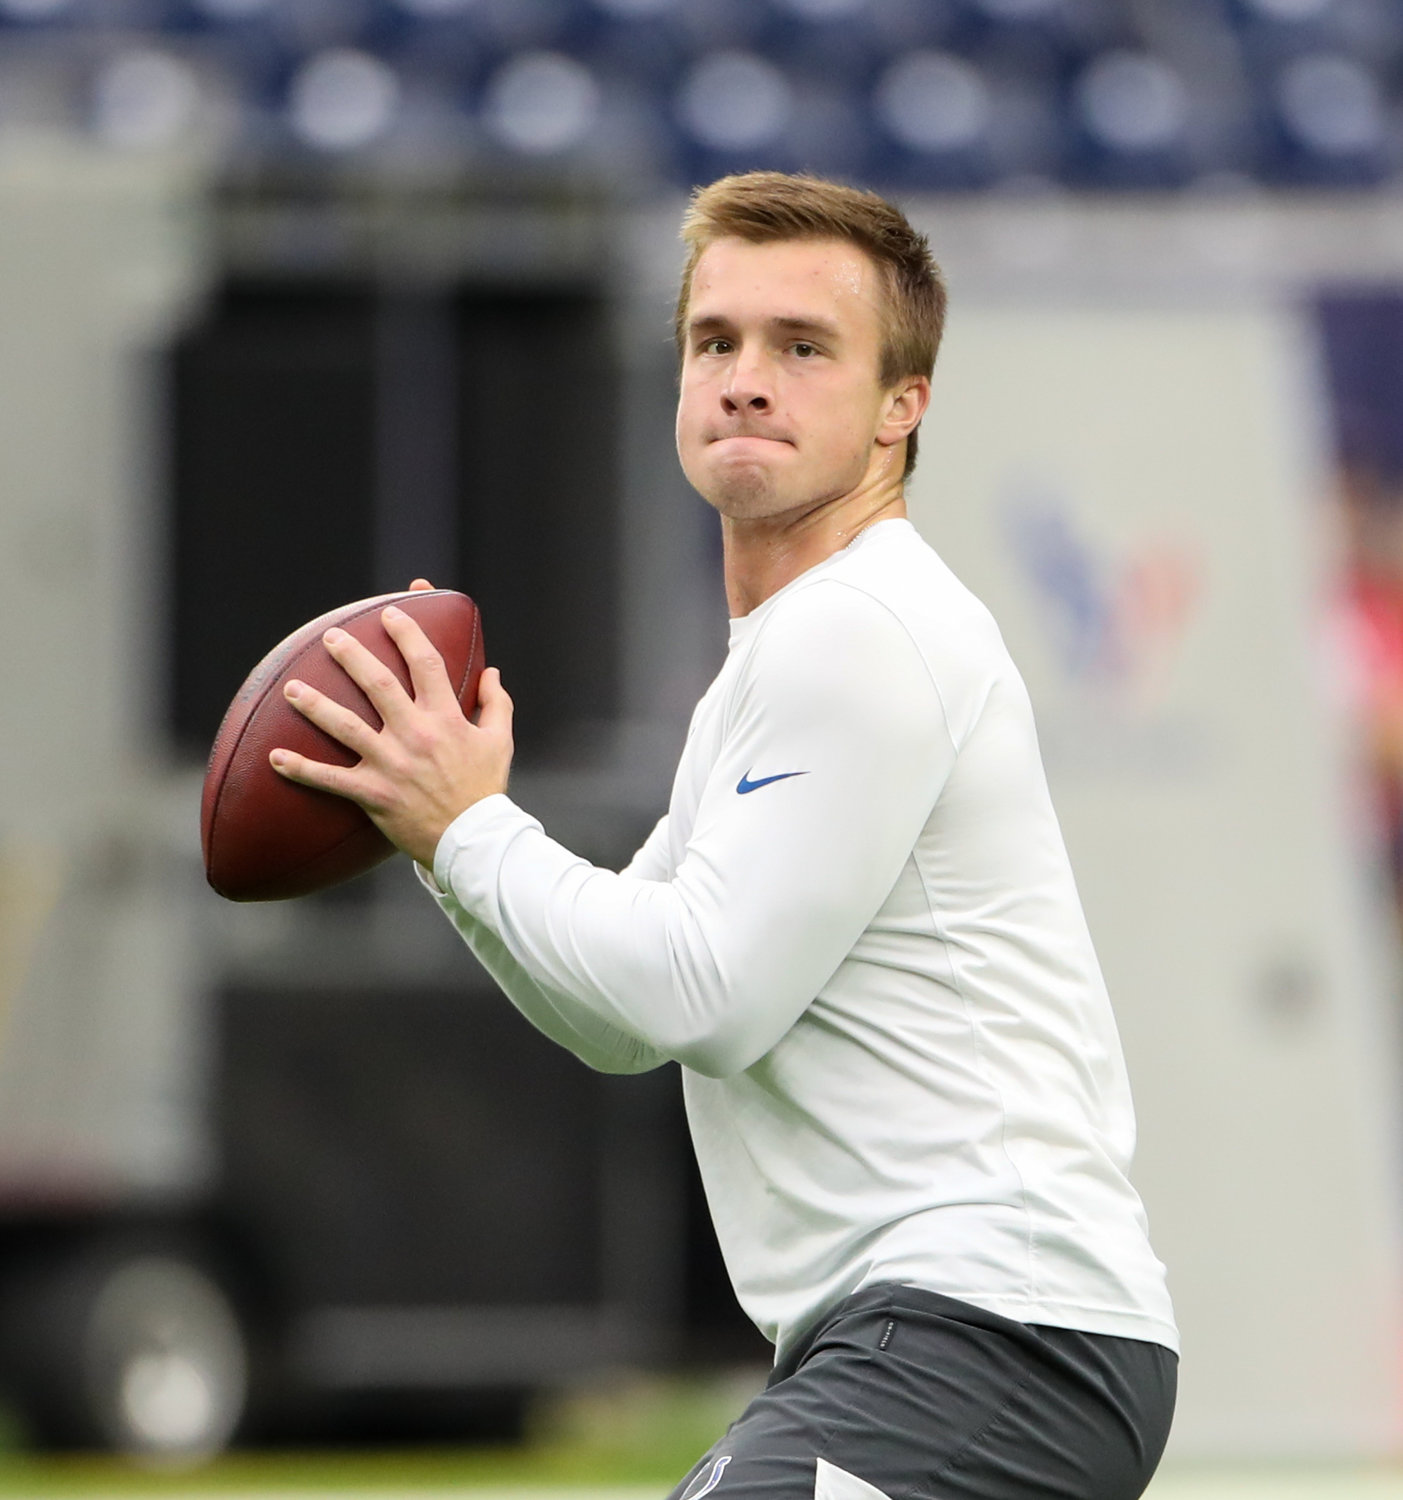 Indianapolis Colts and former Texas Longhorn and Westlake Chaparral quarterback Sam Ehlinger (4) warms up before an NFL game between the Texans and the Colts on December 5, 2021 in Houston, Texas.